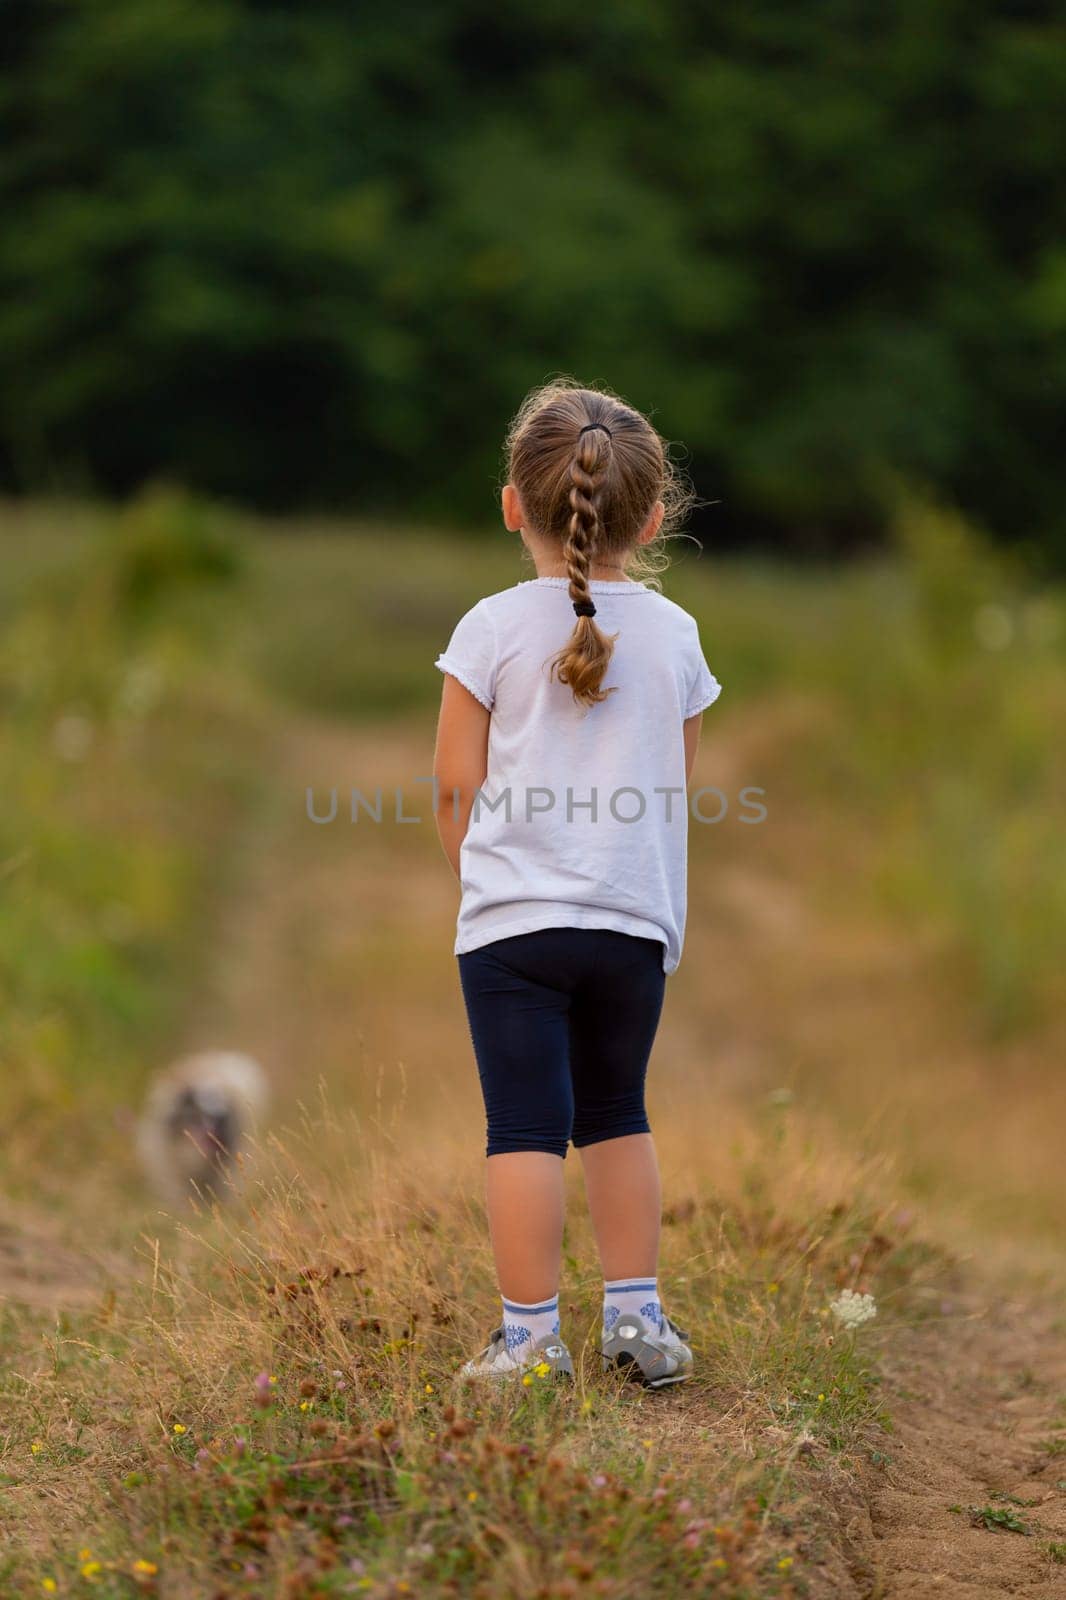 little girl on a dirt road by zokov